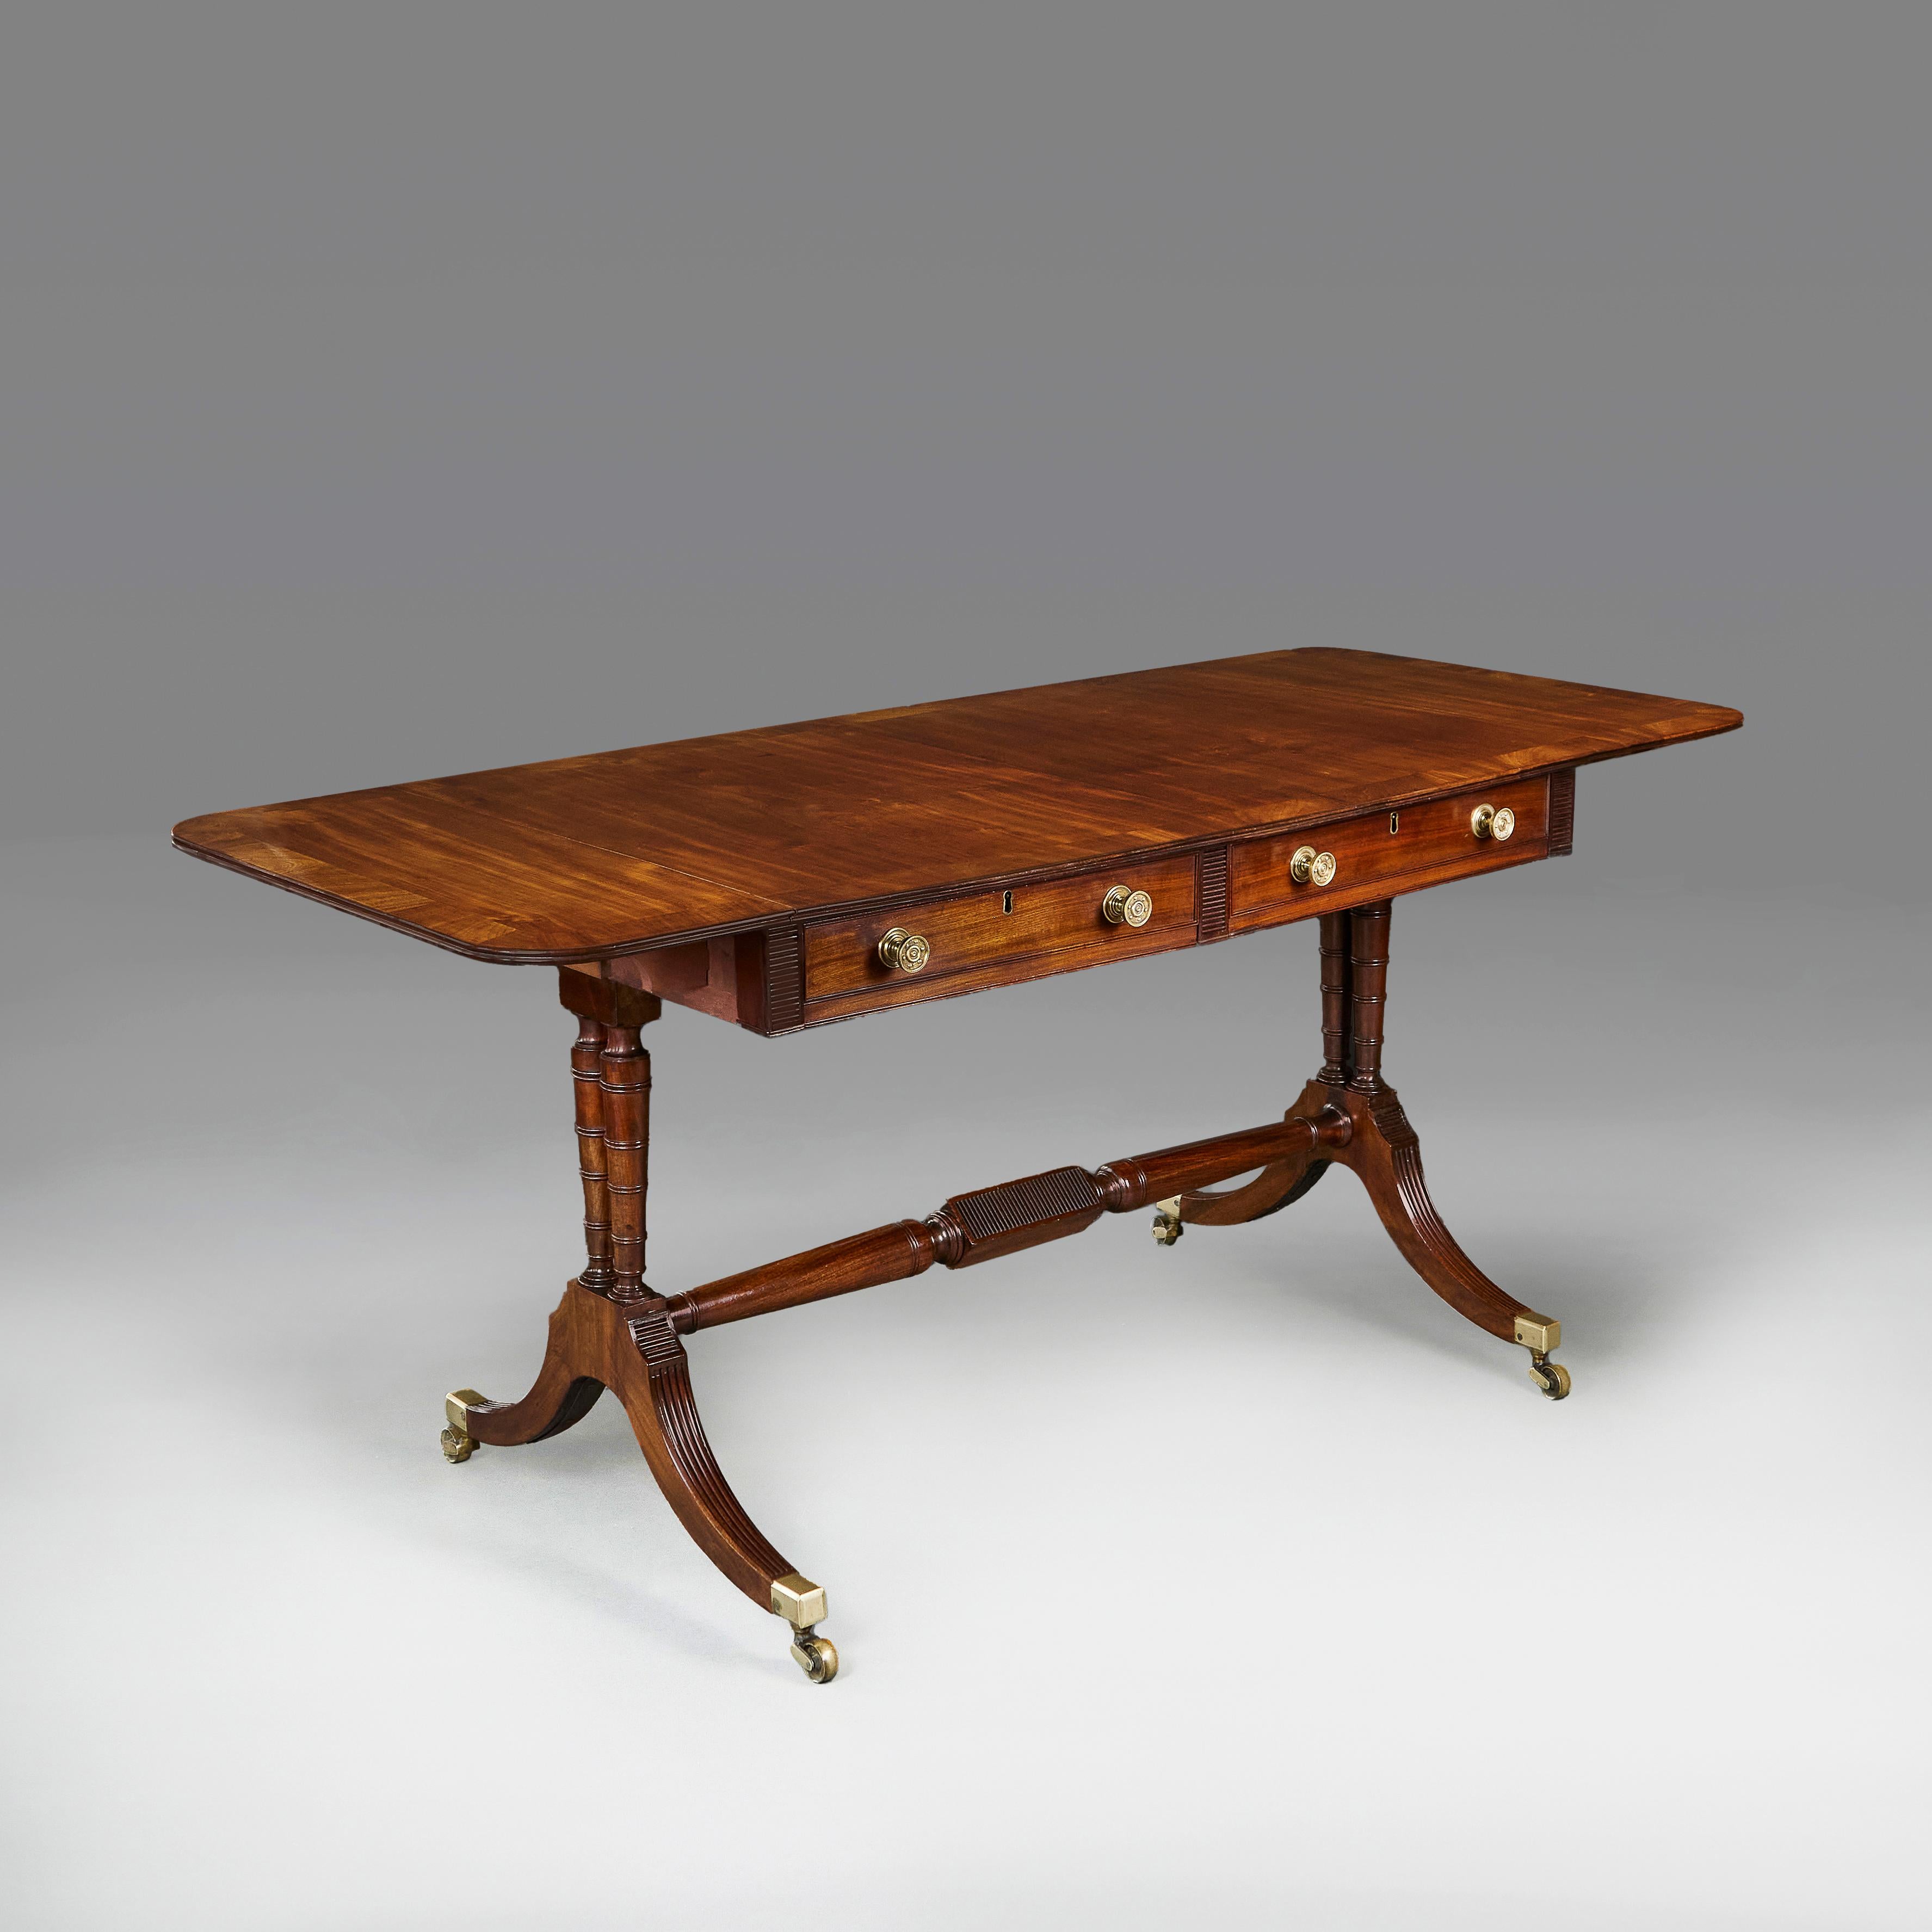 A fine William IV mahogany sofa table, with two drawers to the frieze, with opening flaps to each side, all supported on out-splayed legs joined by a turned stretcher, the feet terminating in brass castors.
England, circa 1830
Height   71.00cm
Width